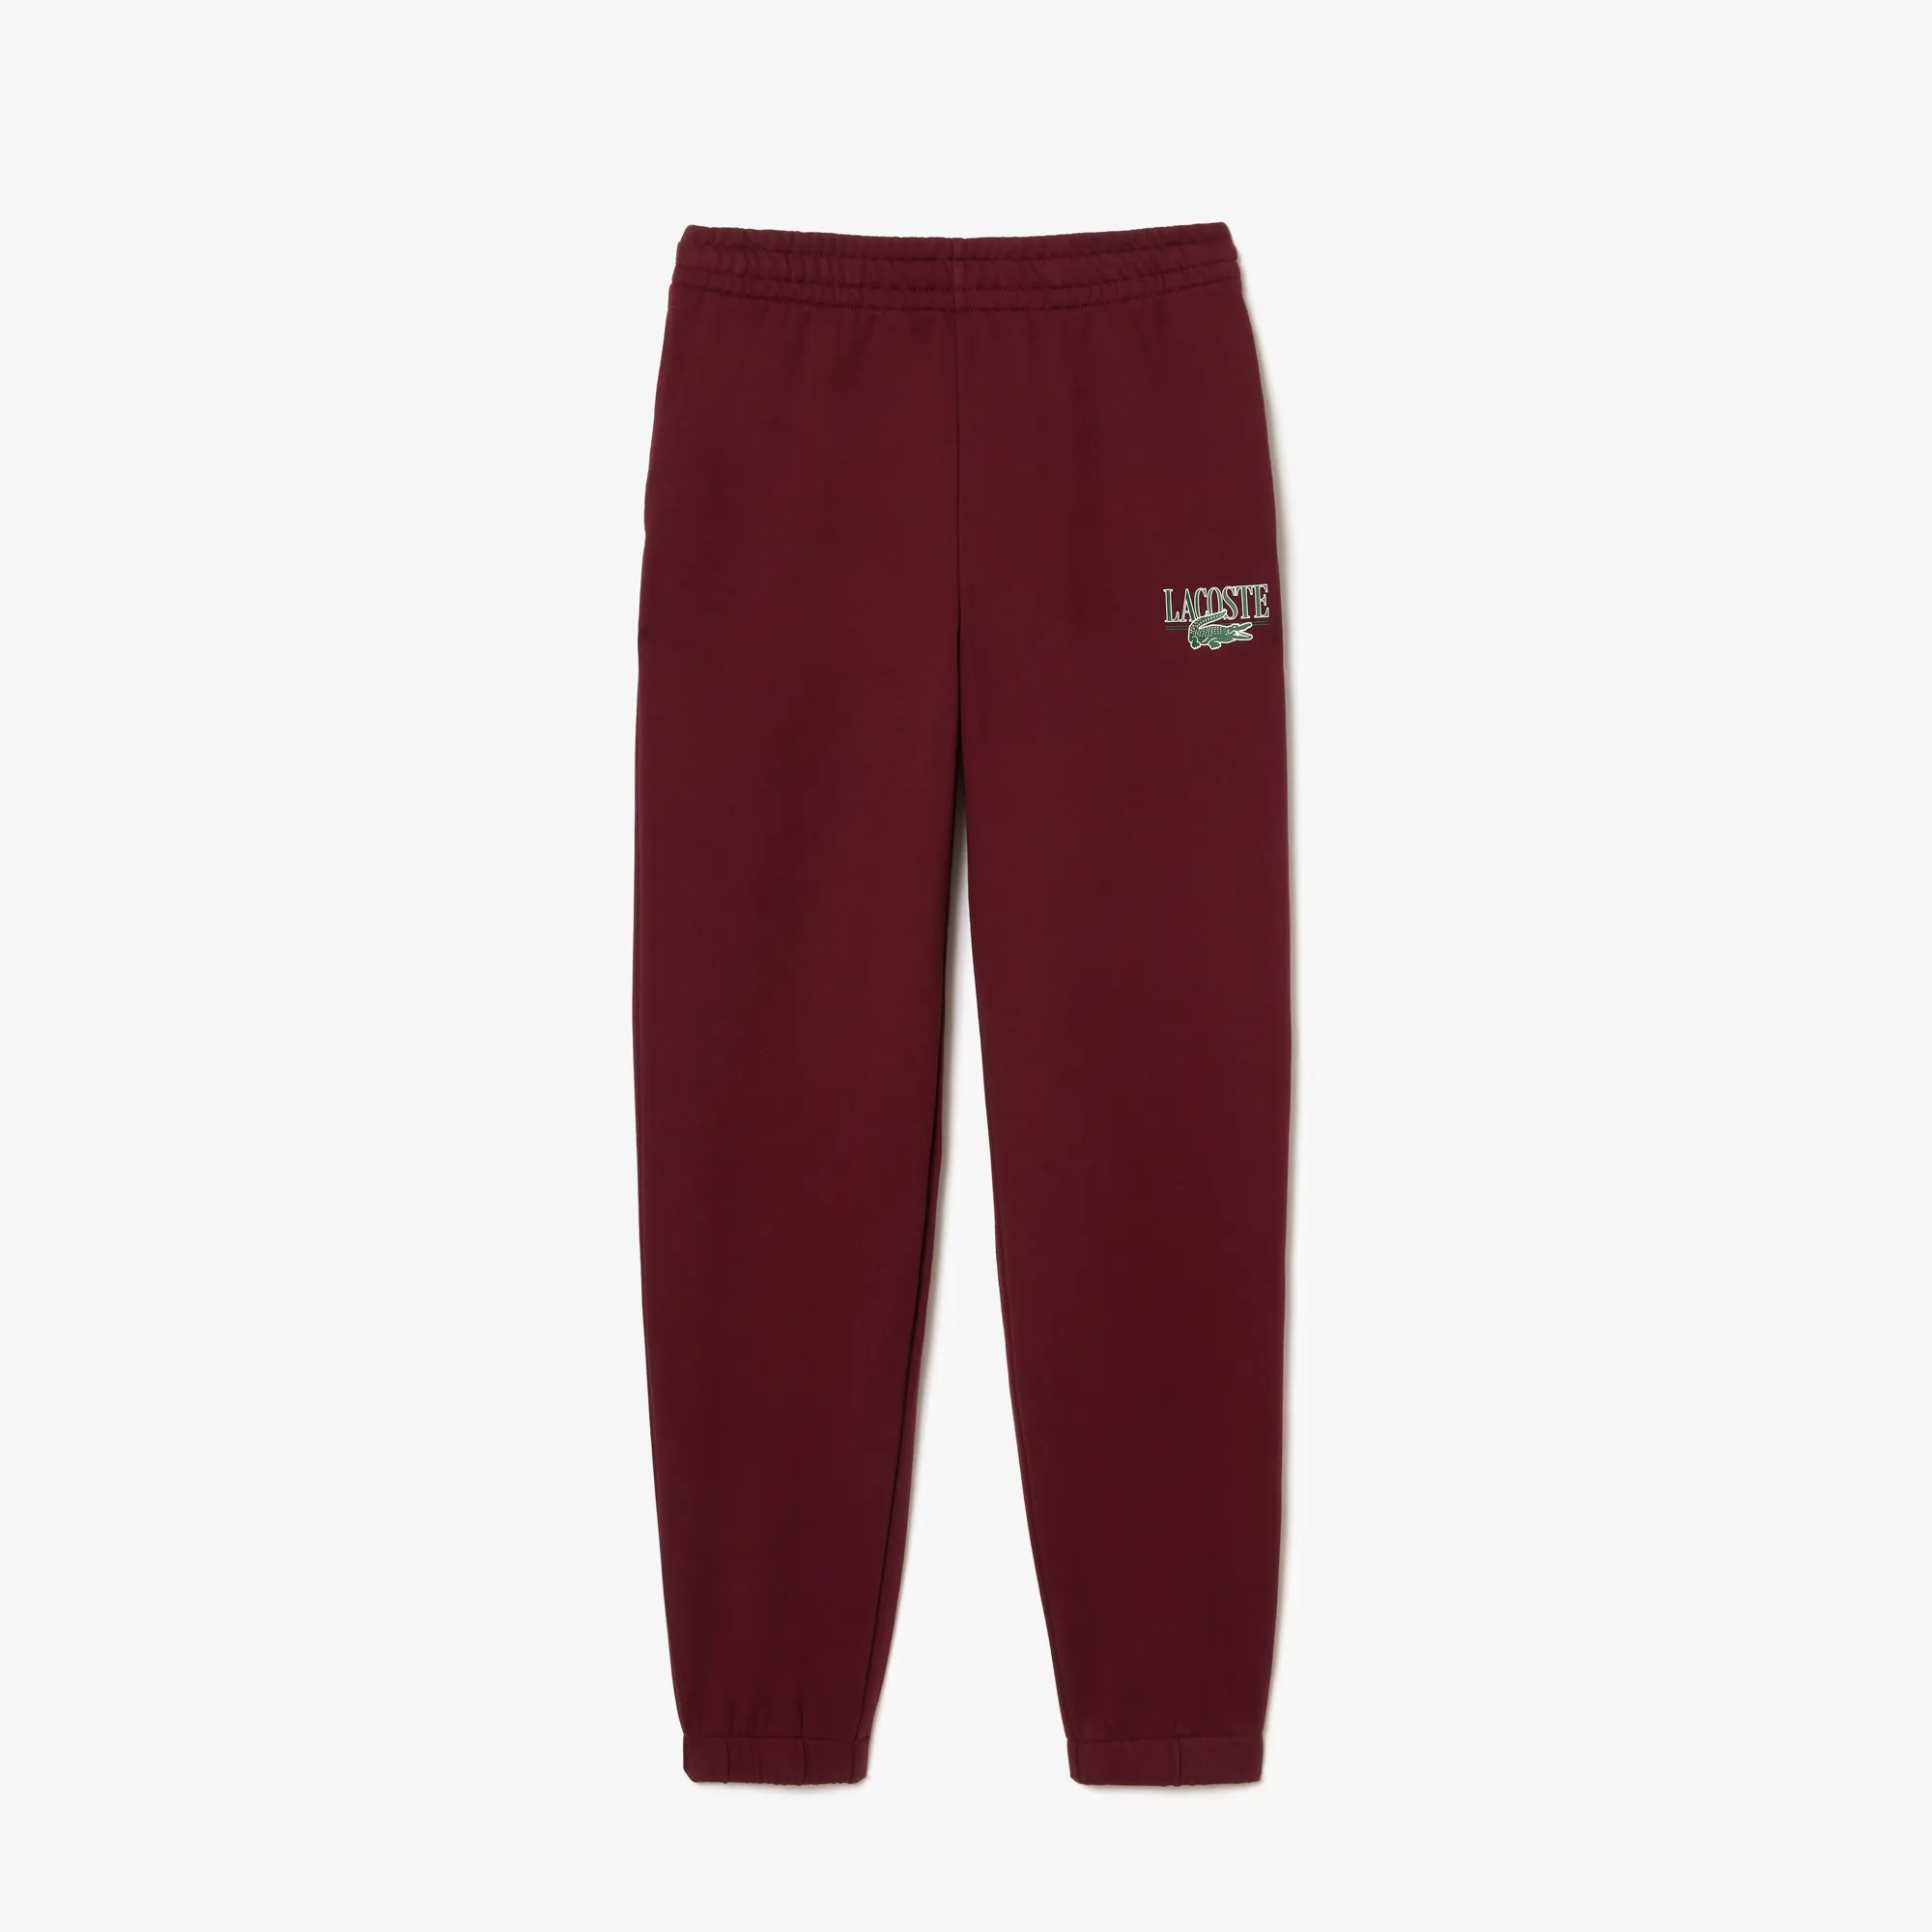 Lacoste Printed Jogger Track Pants